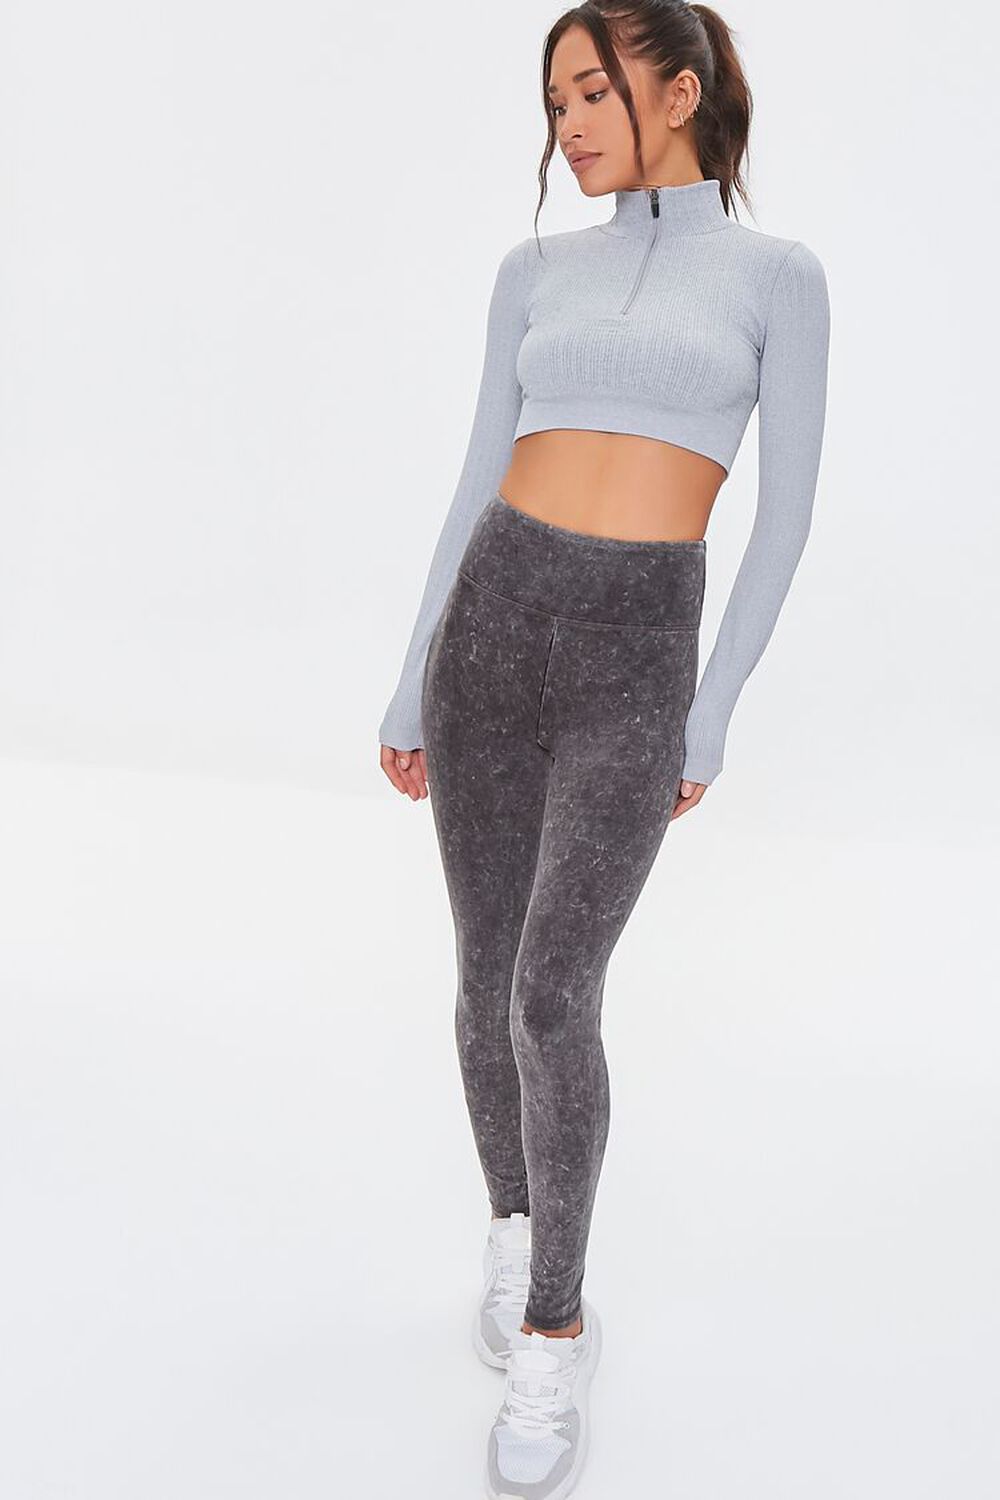 CHARCOAL Active Mineral Wash Leggings, image 1